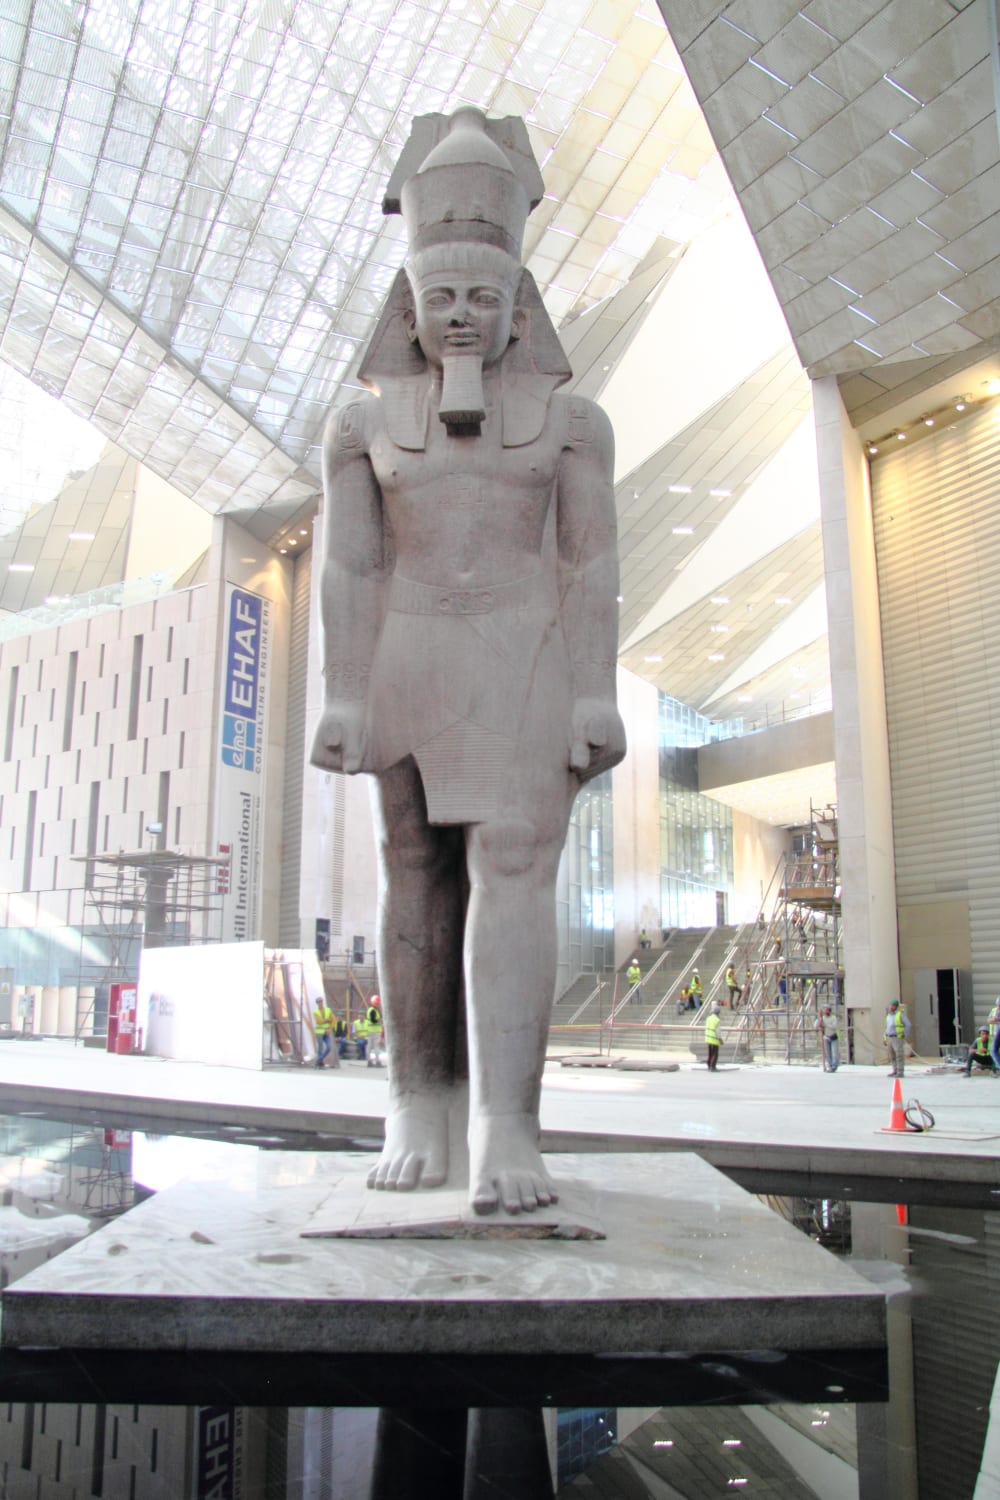 A 3,200-year-old statue of Ramesses II discovered in 1820 by Giovanni Battista Caviglia at the Great Temple of Ptah near Memphis, Egypt. Made from red granite, the statue is 11 meters tall and weighs 83 tons. Now located in the entrance hall of the Grand Egyptian Museum